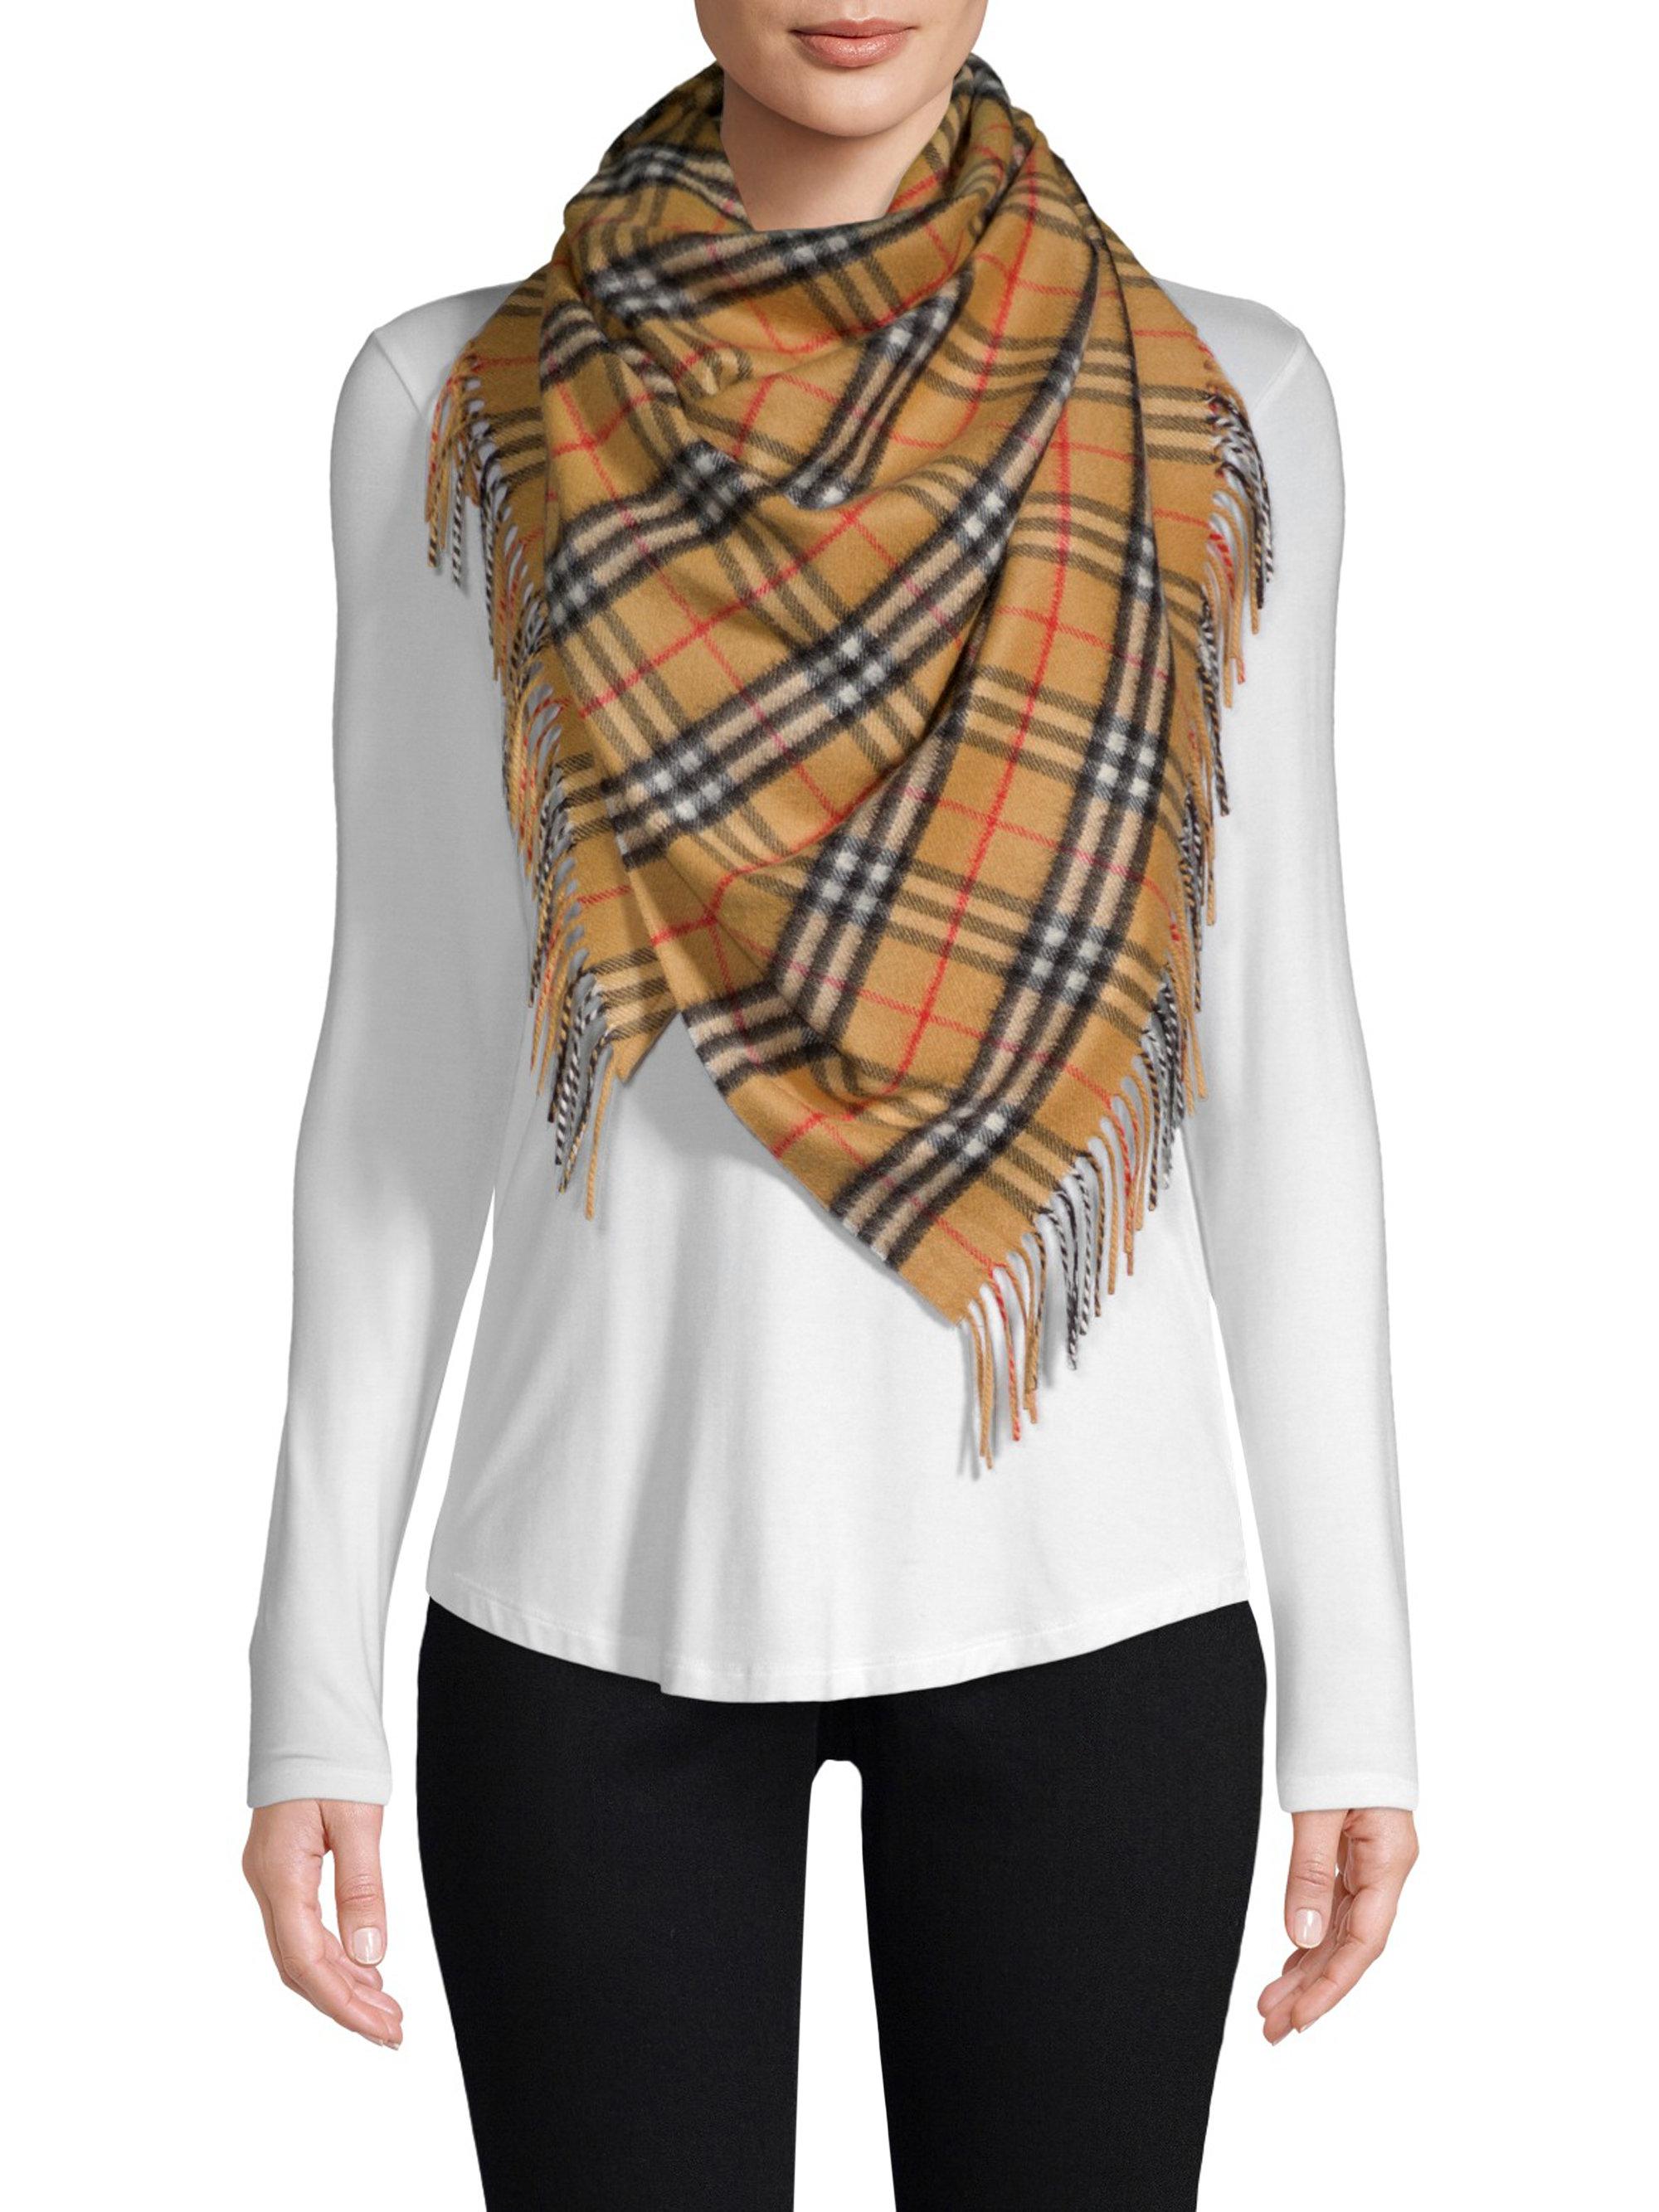 Burberry Vintage Check Cashmere Bandana Scarf in Antique Yellow (White) -  Lyst